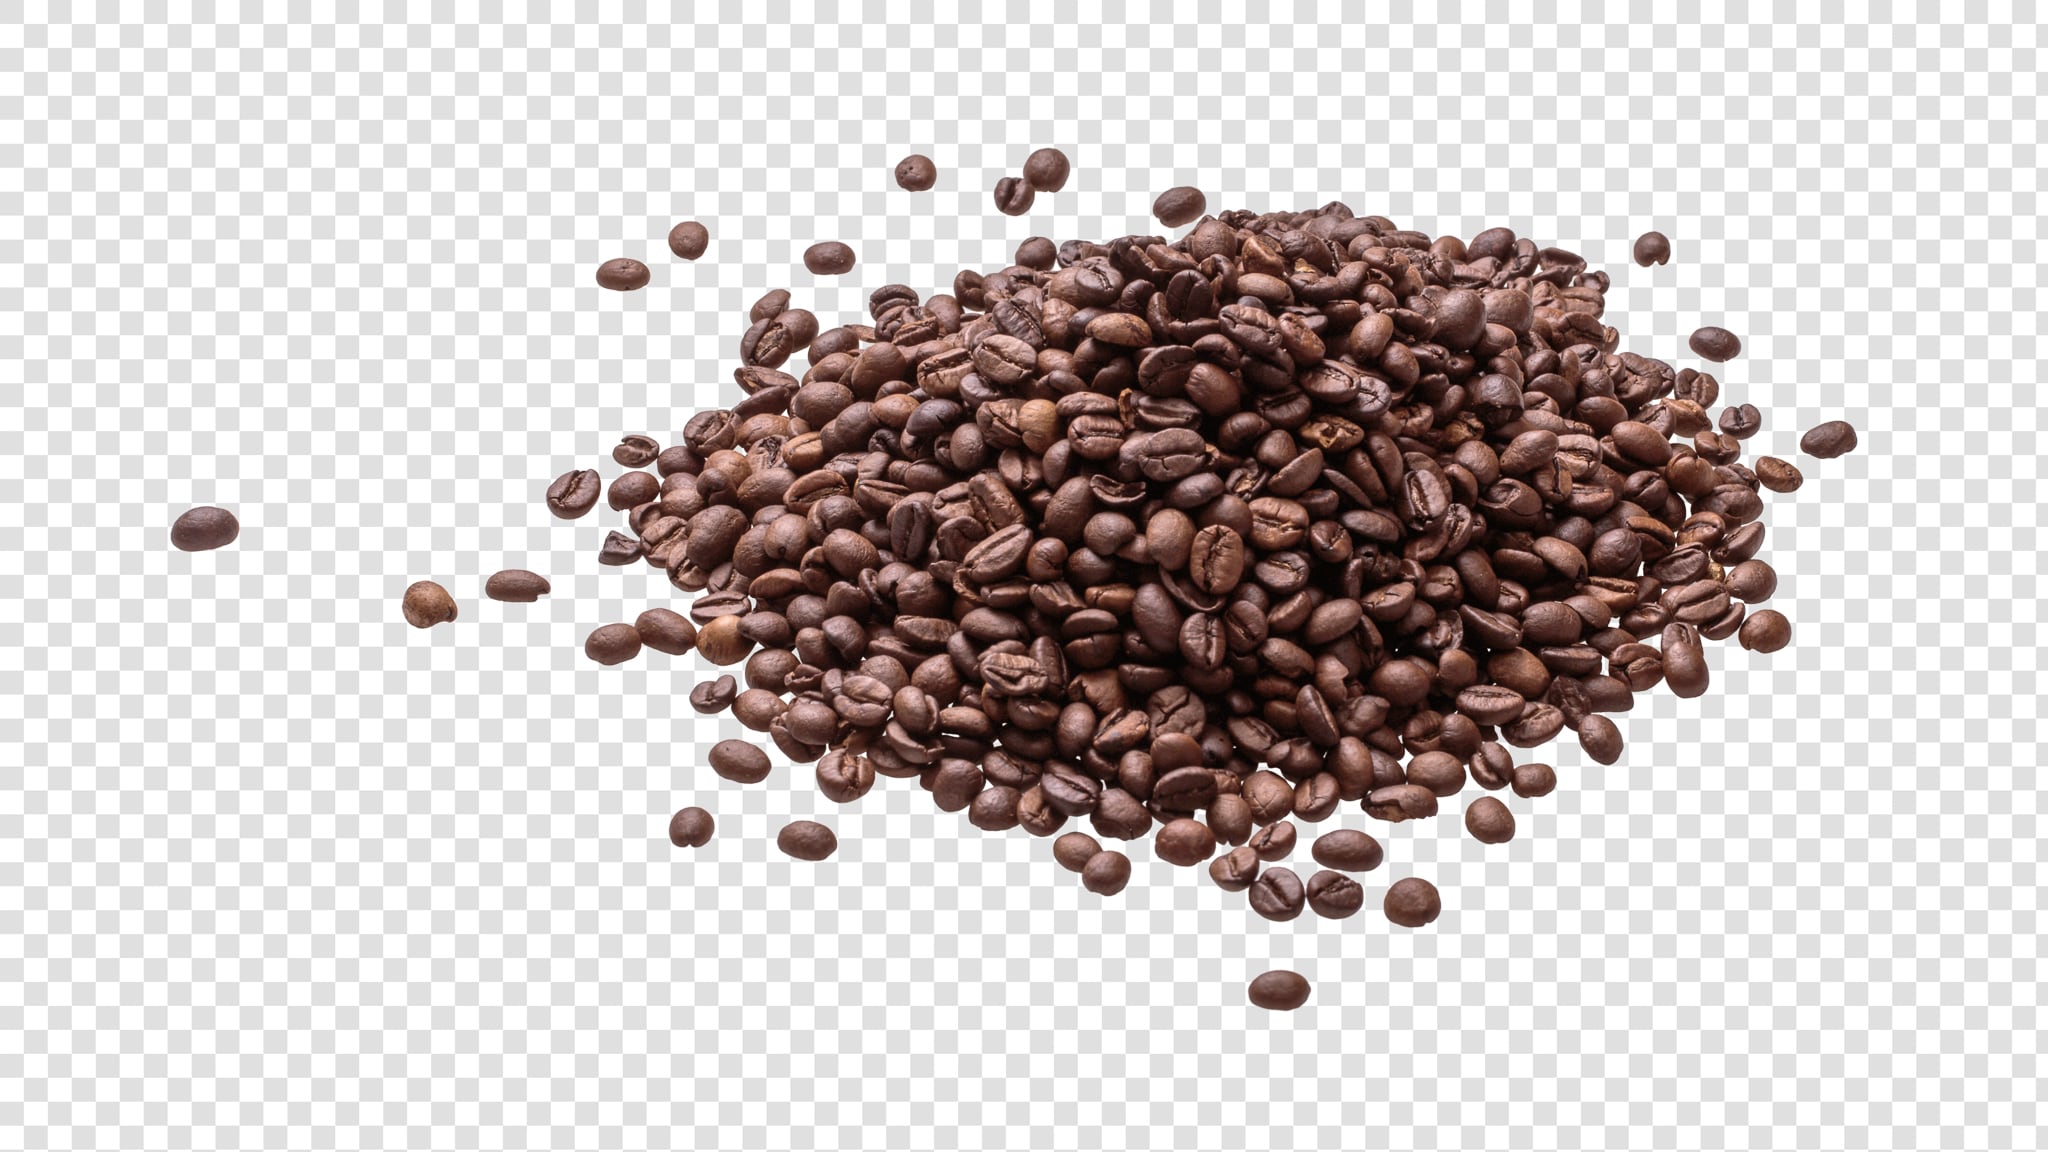 Coffee image with transparent background